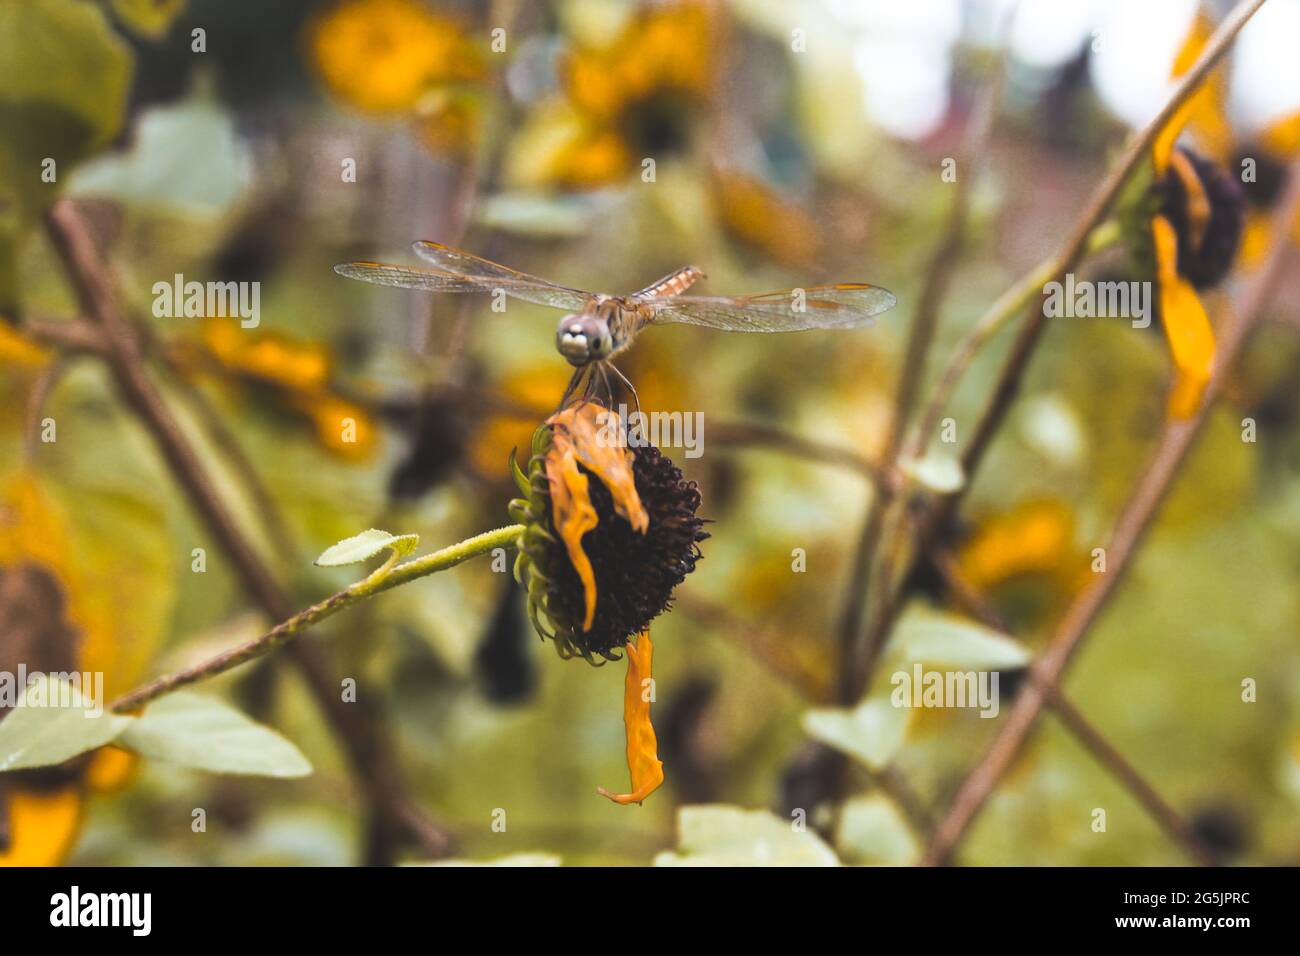 Medium-sized dragonfly on a withered flower Stock Photo